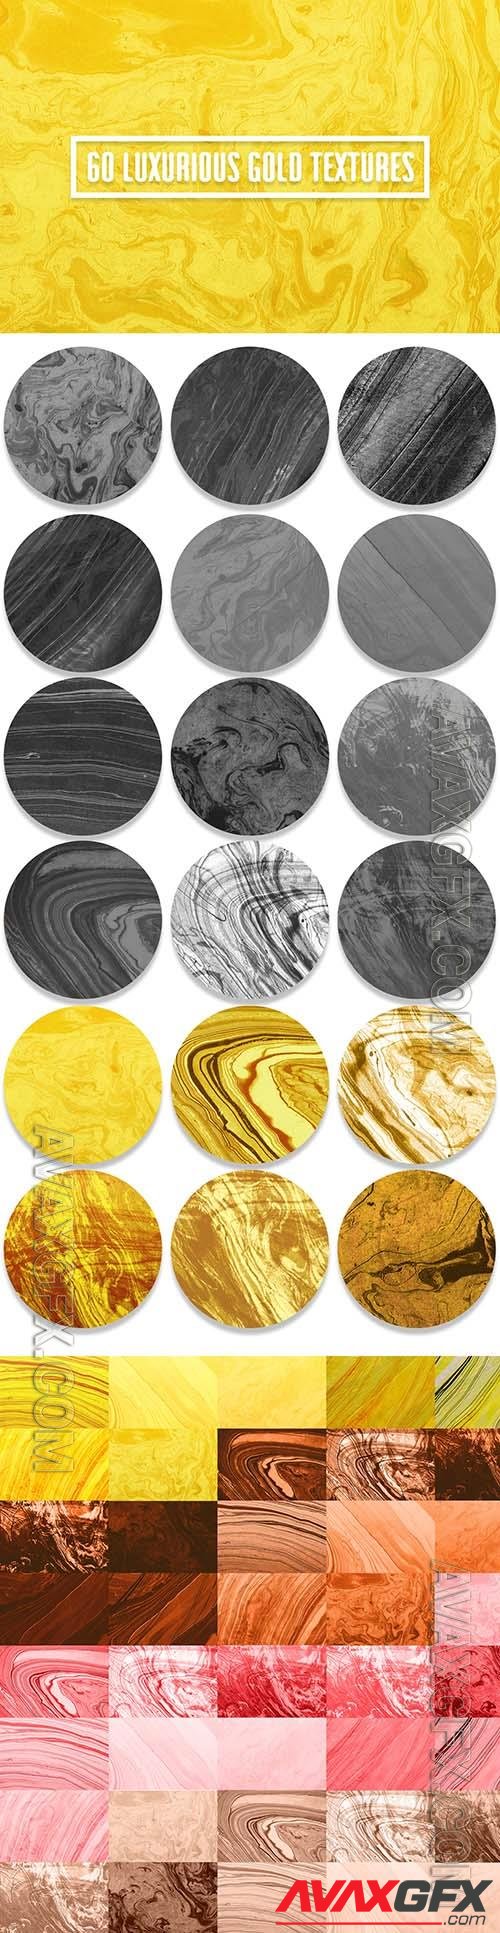 60 Luxurious Gold Textures & Gold Marble Textures